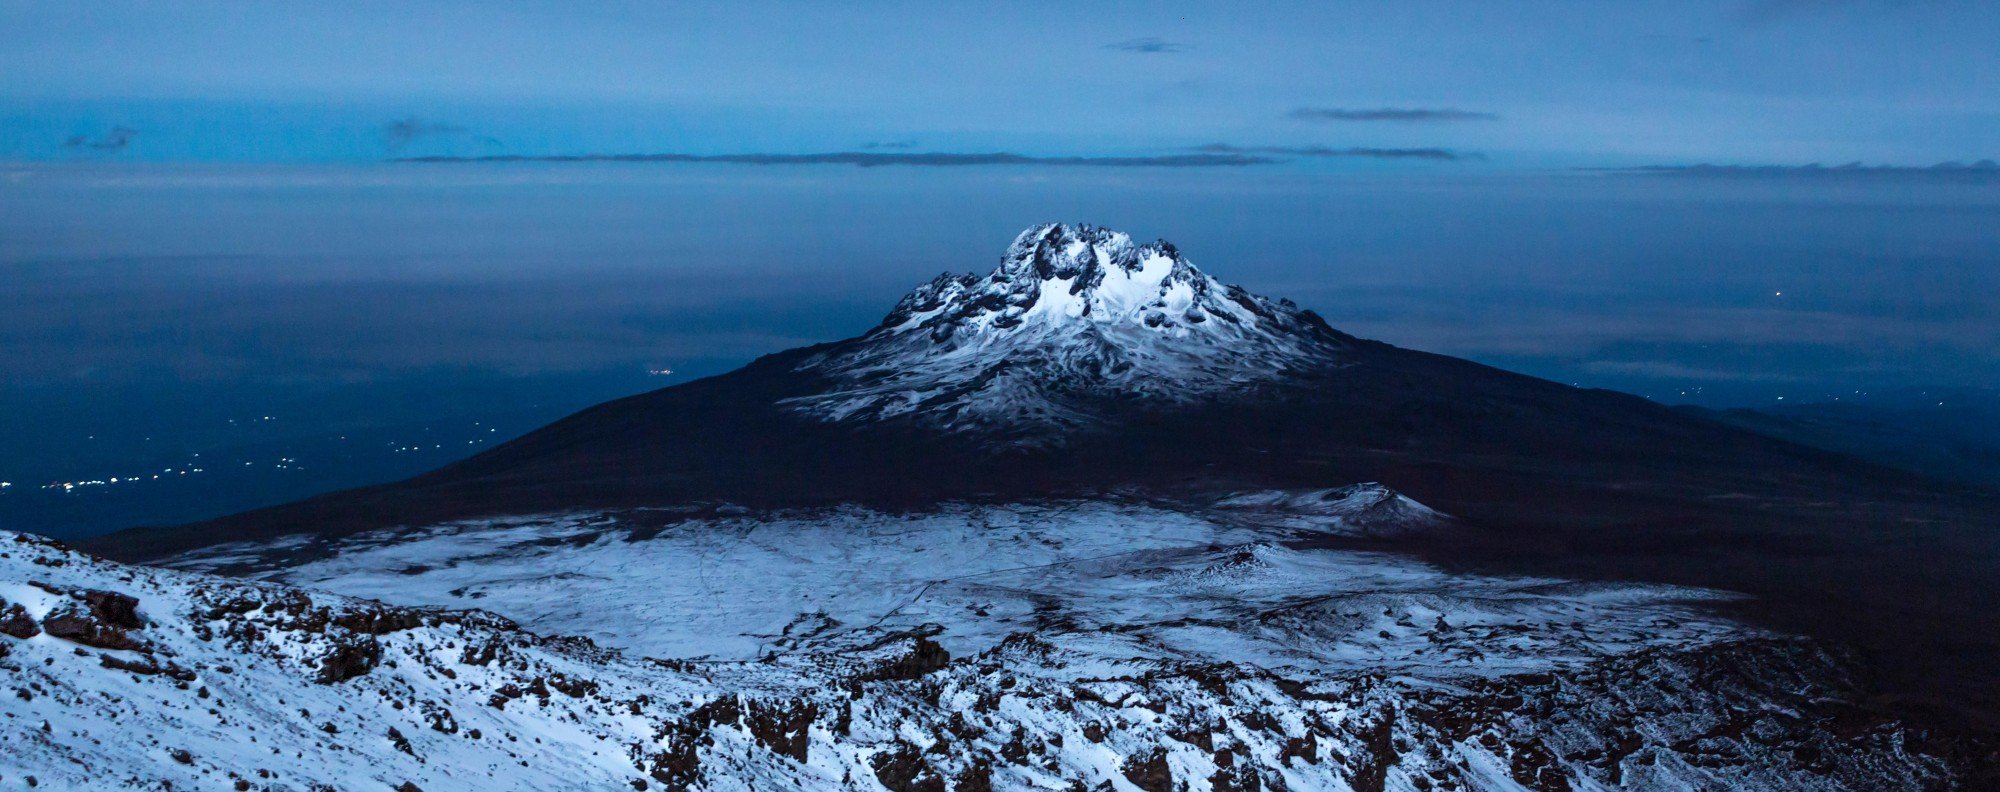 Climbing Kilimanjaro: the good, bad and ugly sides to conquering Africa’s highest peak  Post 